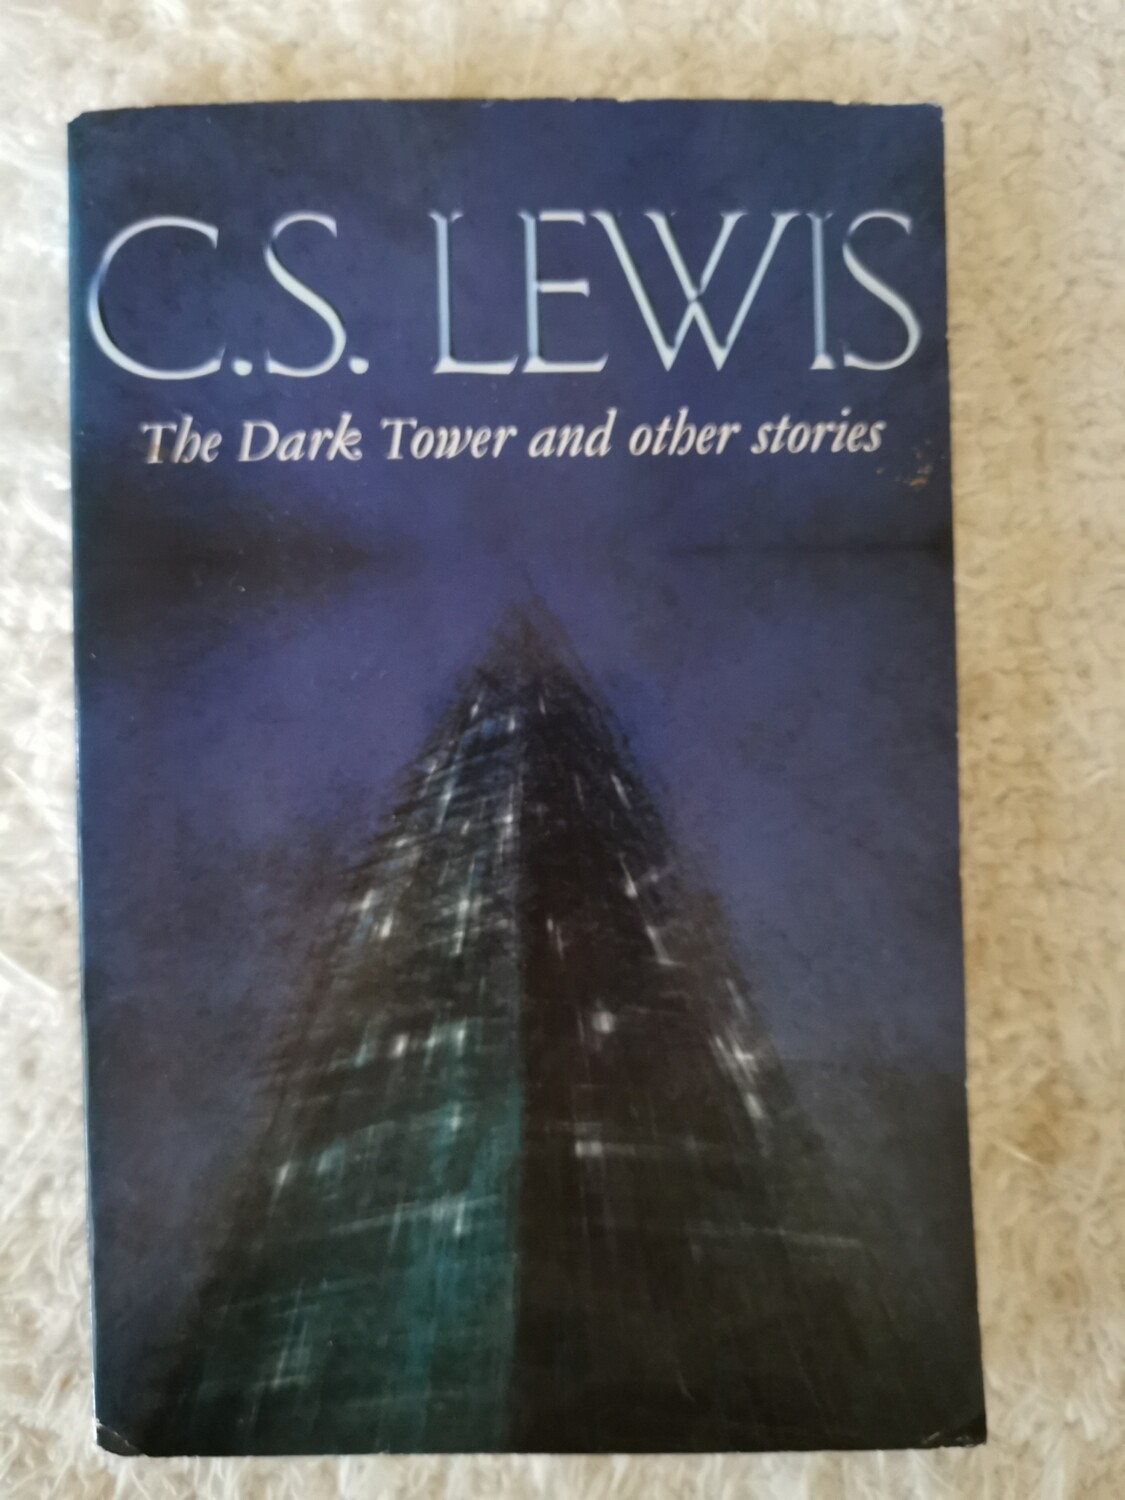 The dark tower and other stories, C. S. Lewis